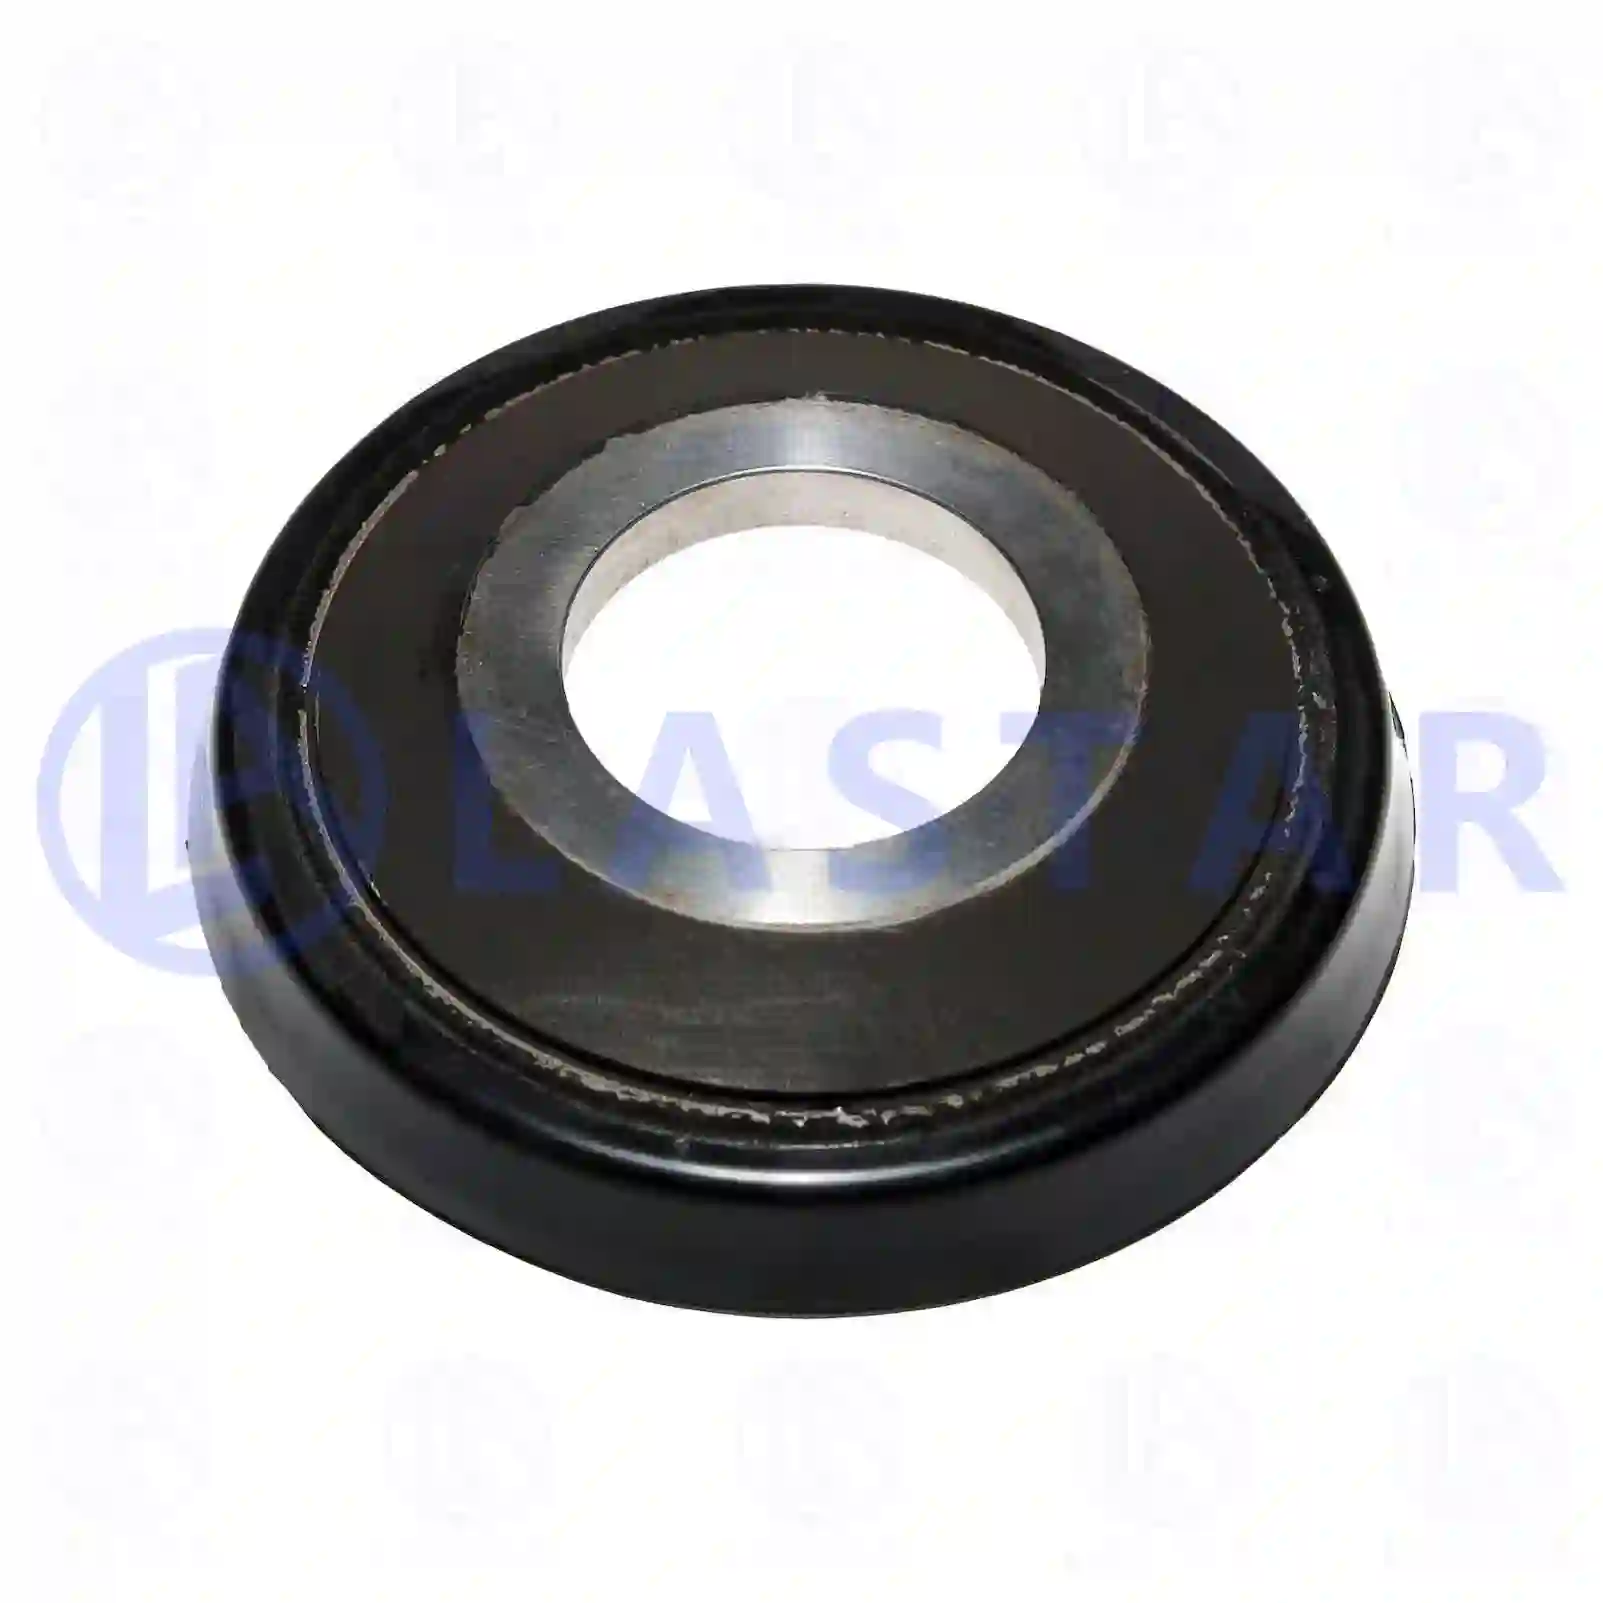 Washer, 77727770, 9423170376, , ||  77727770 Lastar Spare Part | Truck Spare Parts, Auotomotive Spare Parts Washer, 77727770, 9423170376, , ||  77727770 Lastar Spare Part | Truck Spare Parts, Auotomotive Spare Parts